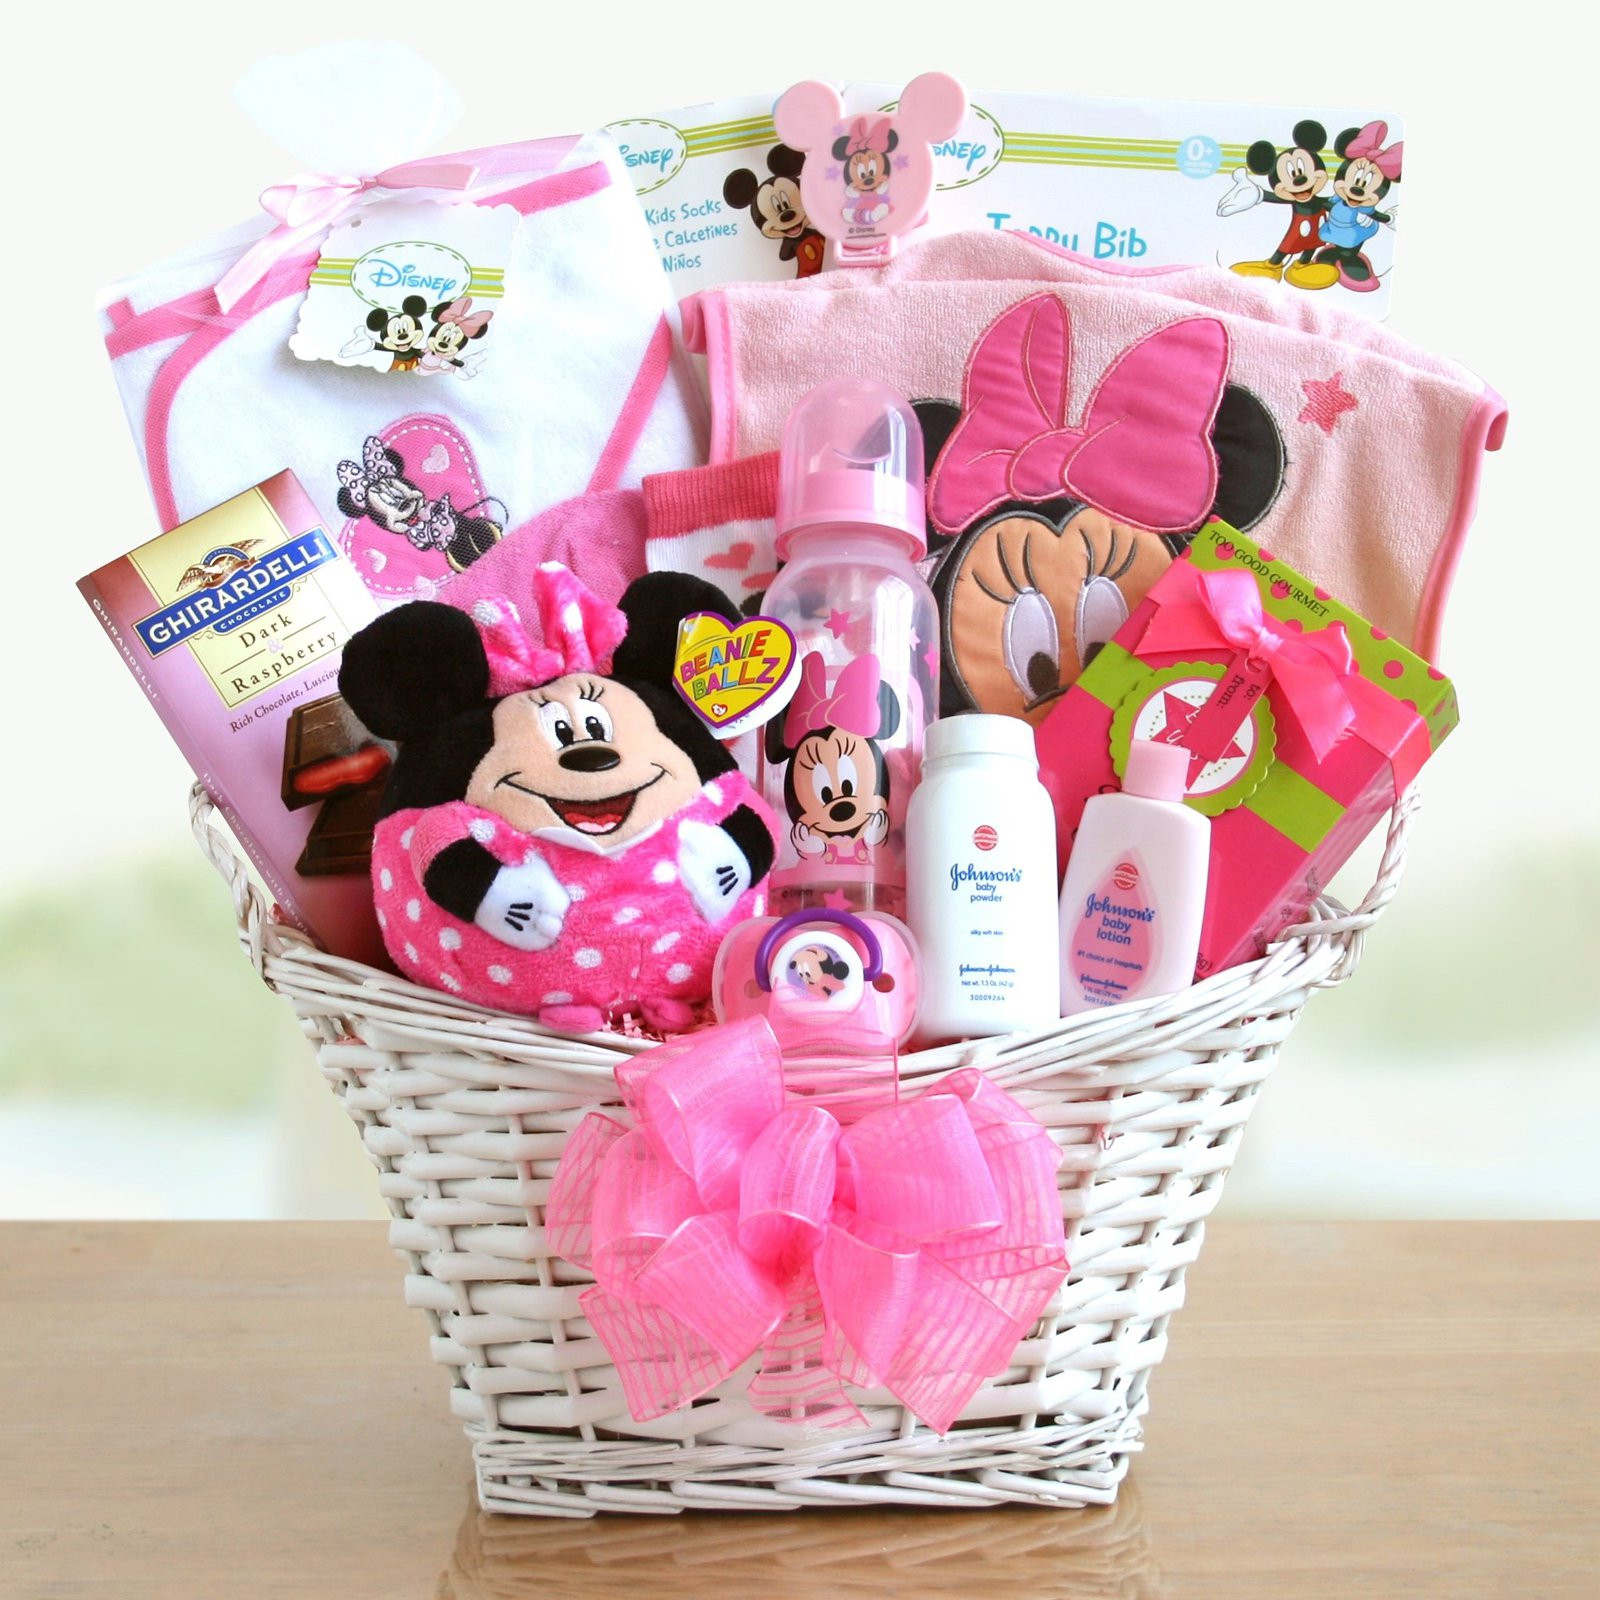 Gift Basket Ideas For Girlfriend
 favorite minnie mouse baby girl t basket t baskets